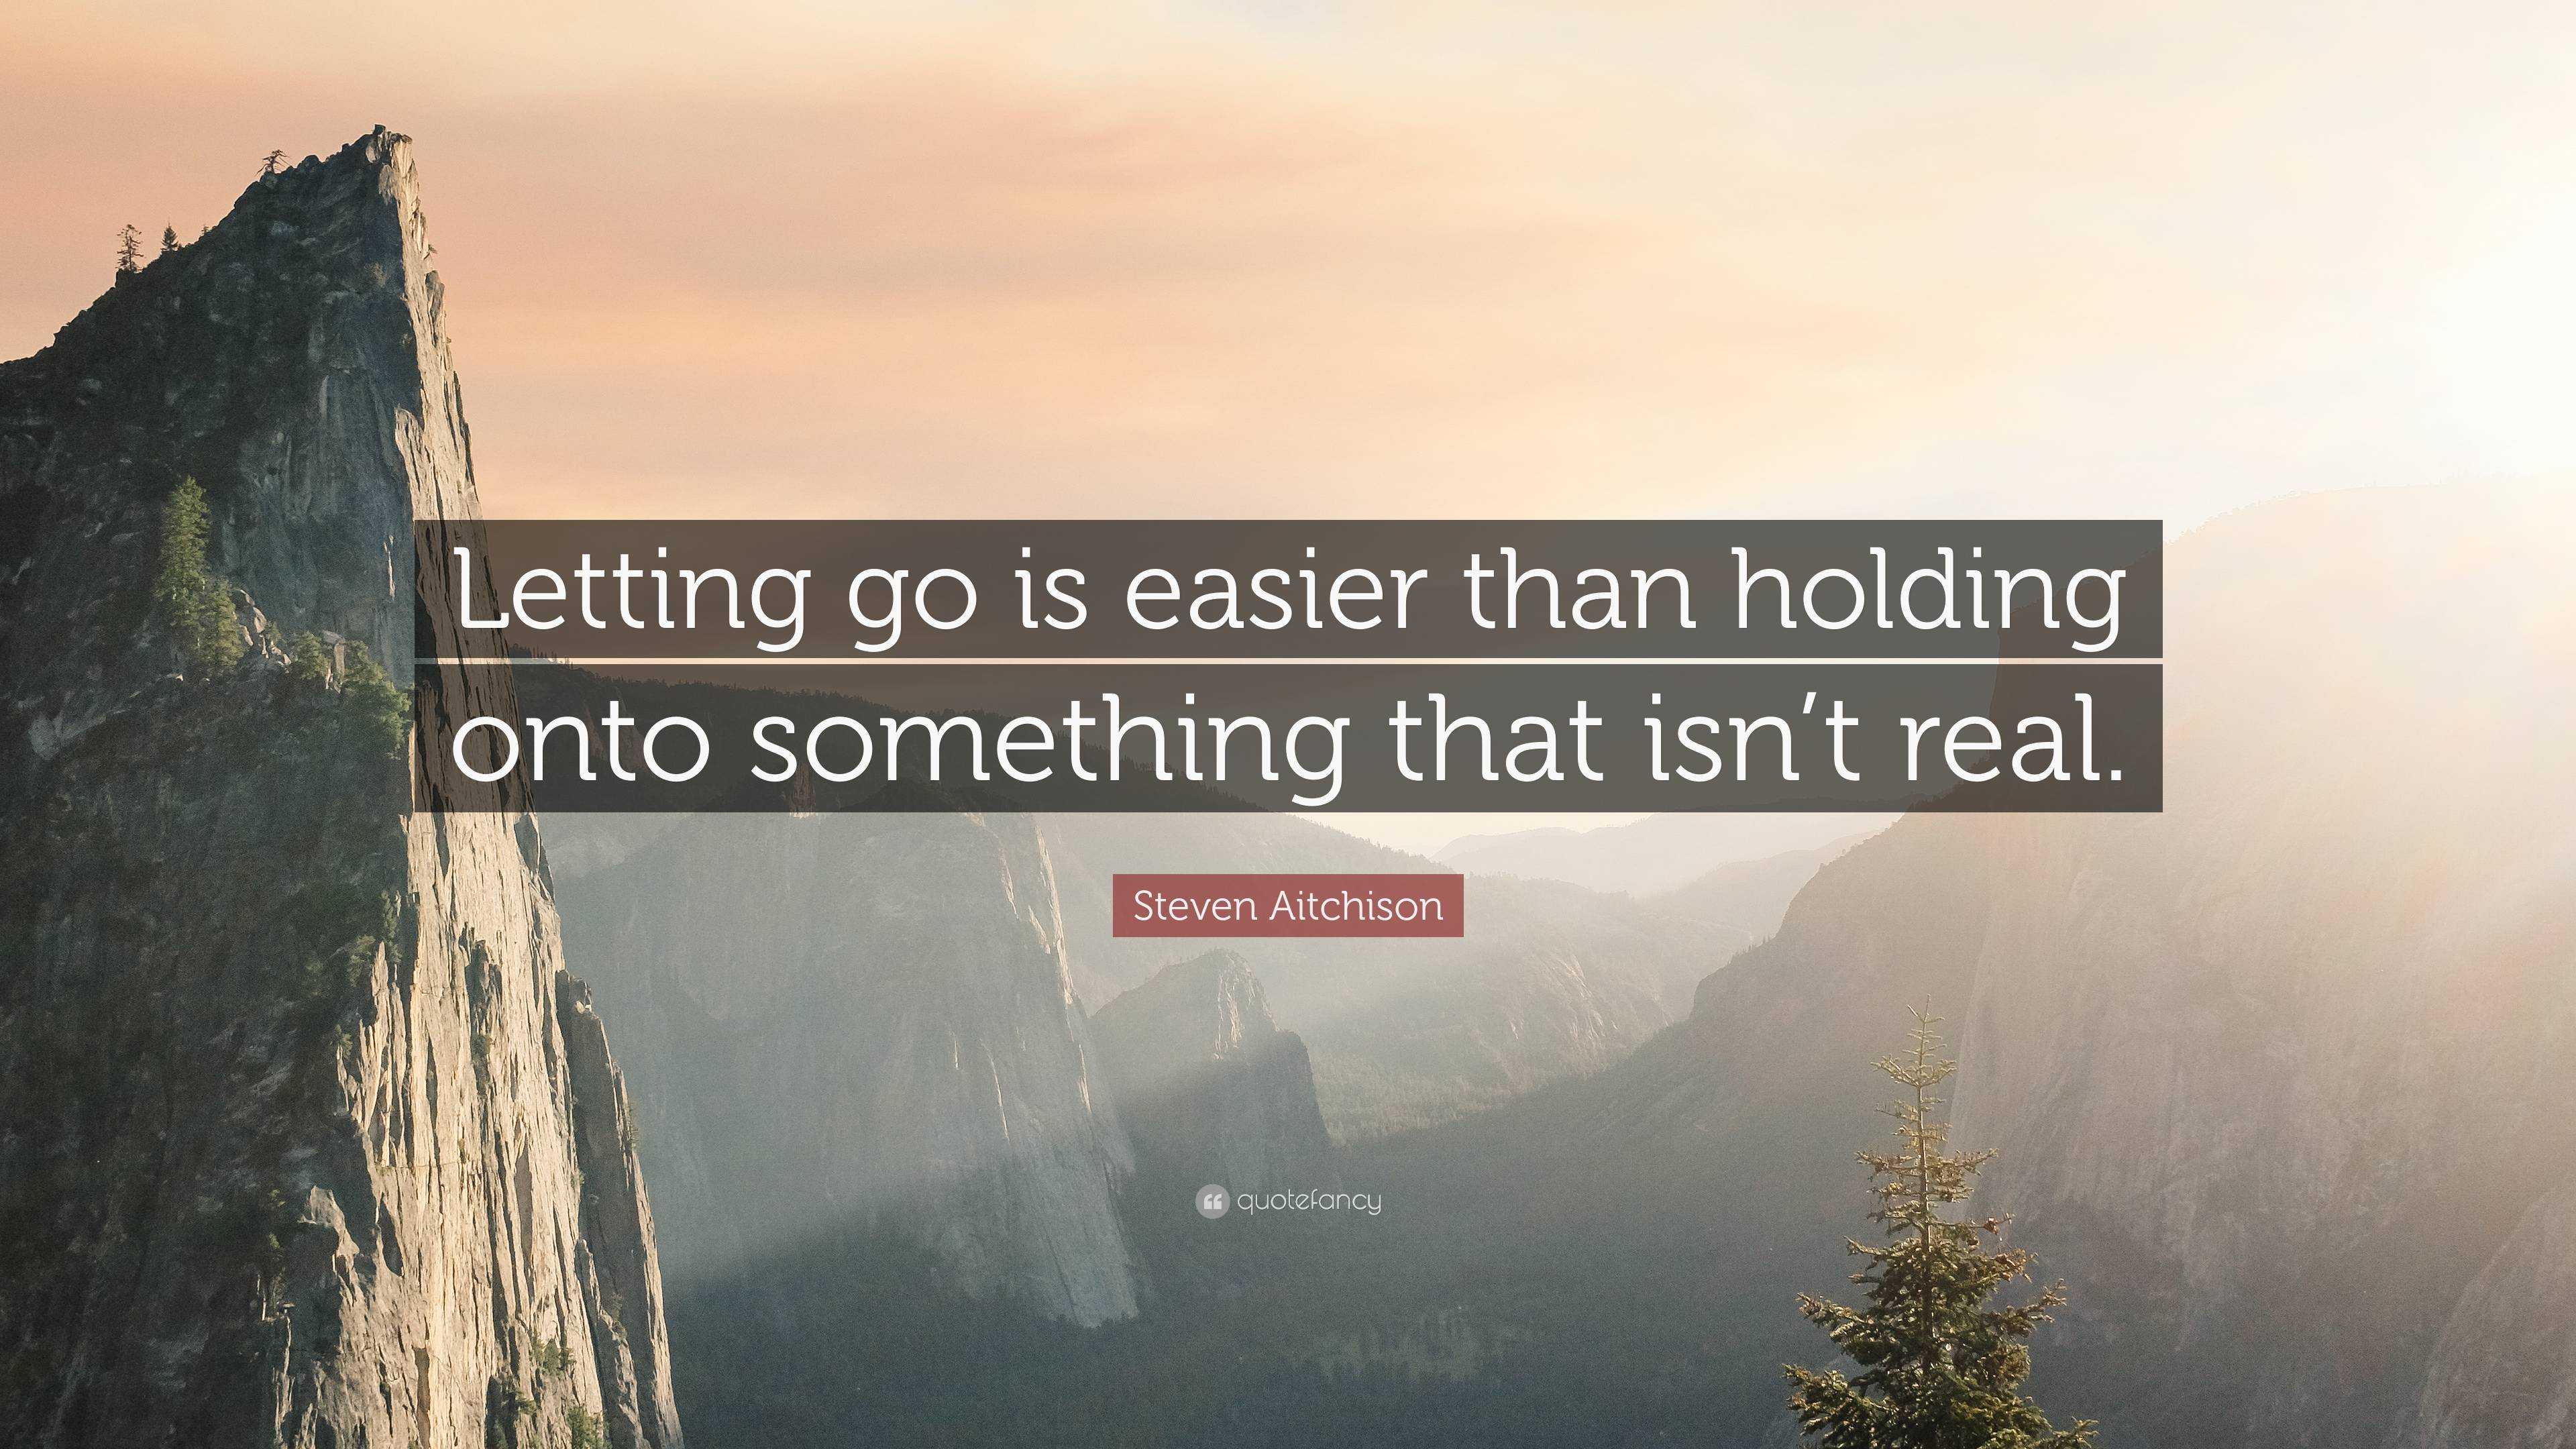 Steven Aitchison Quote: “Letting go is easier than holding onto ...